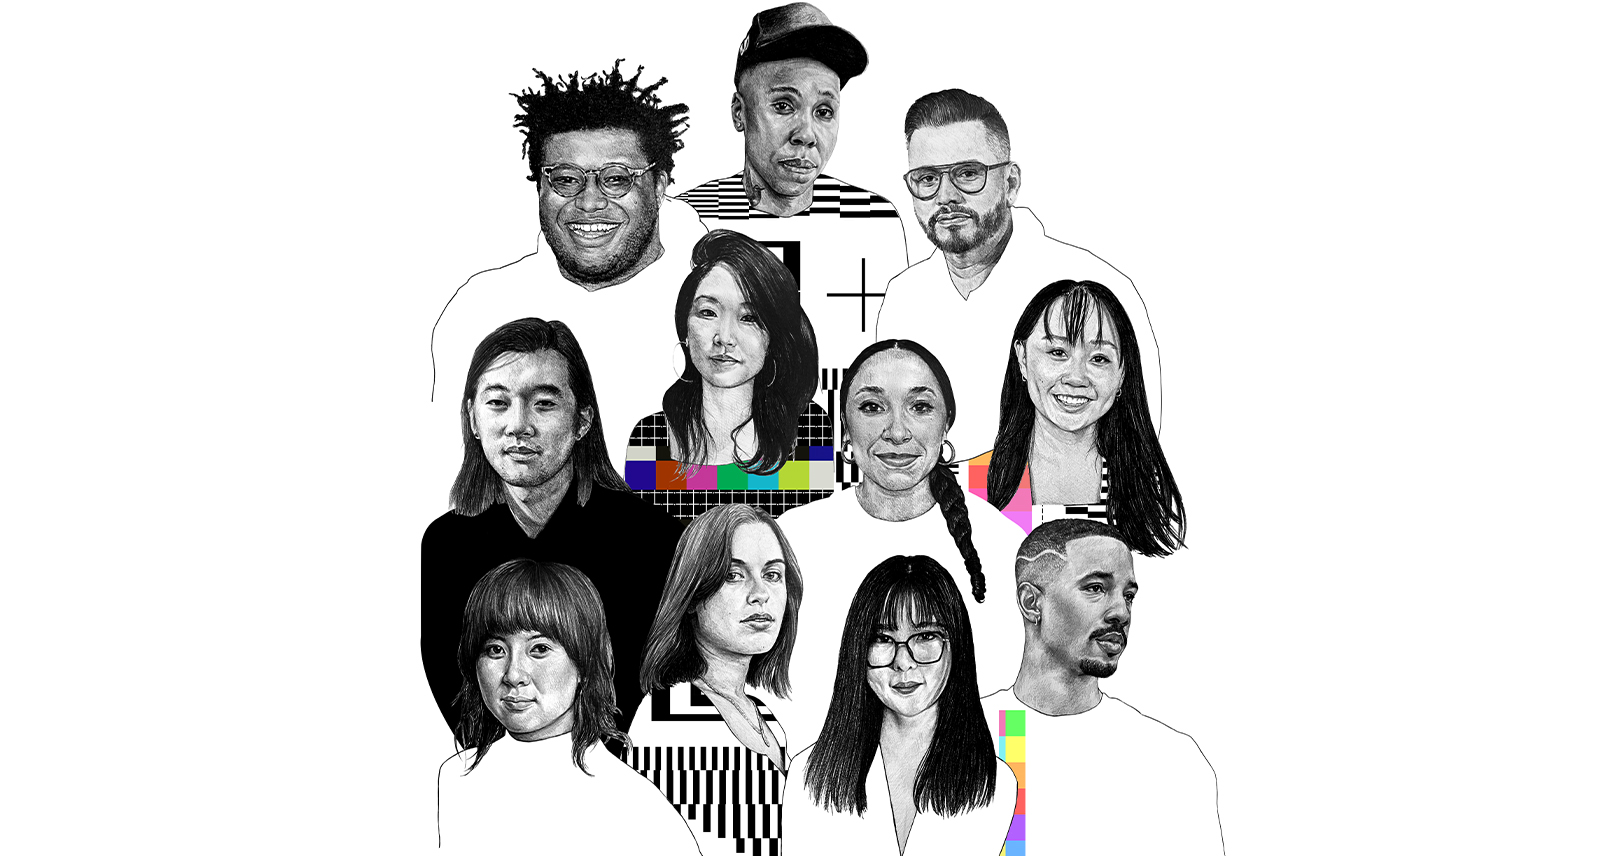 Portraits of eleven BIPOC filmmakers in a sketch style on a white background